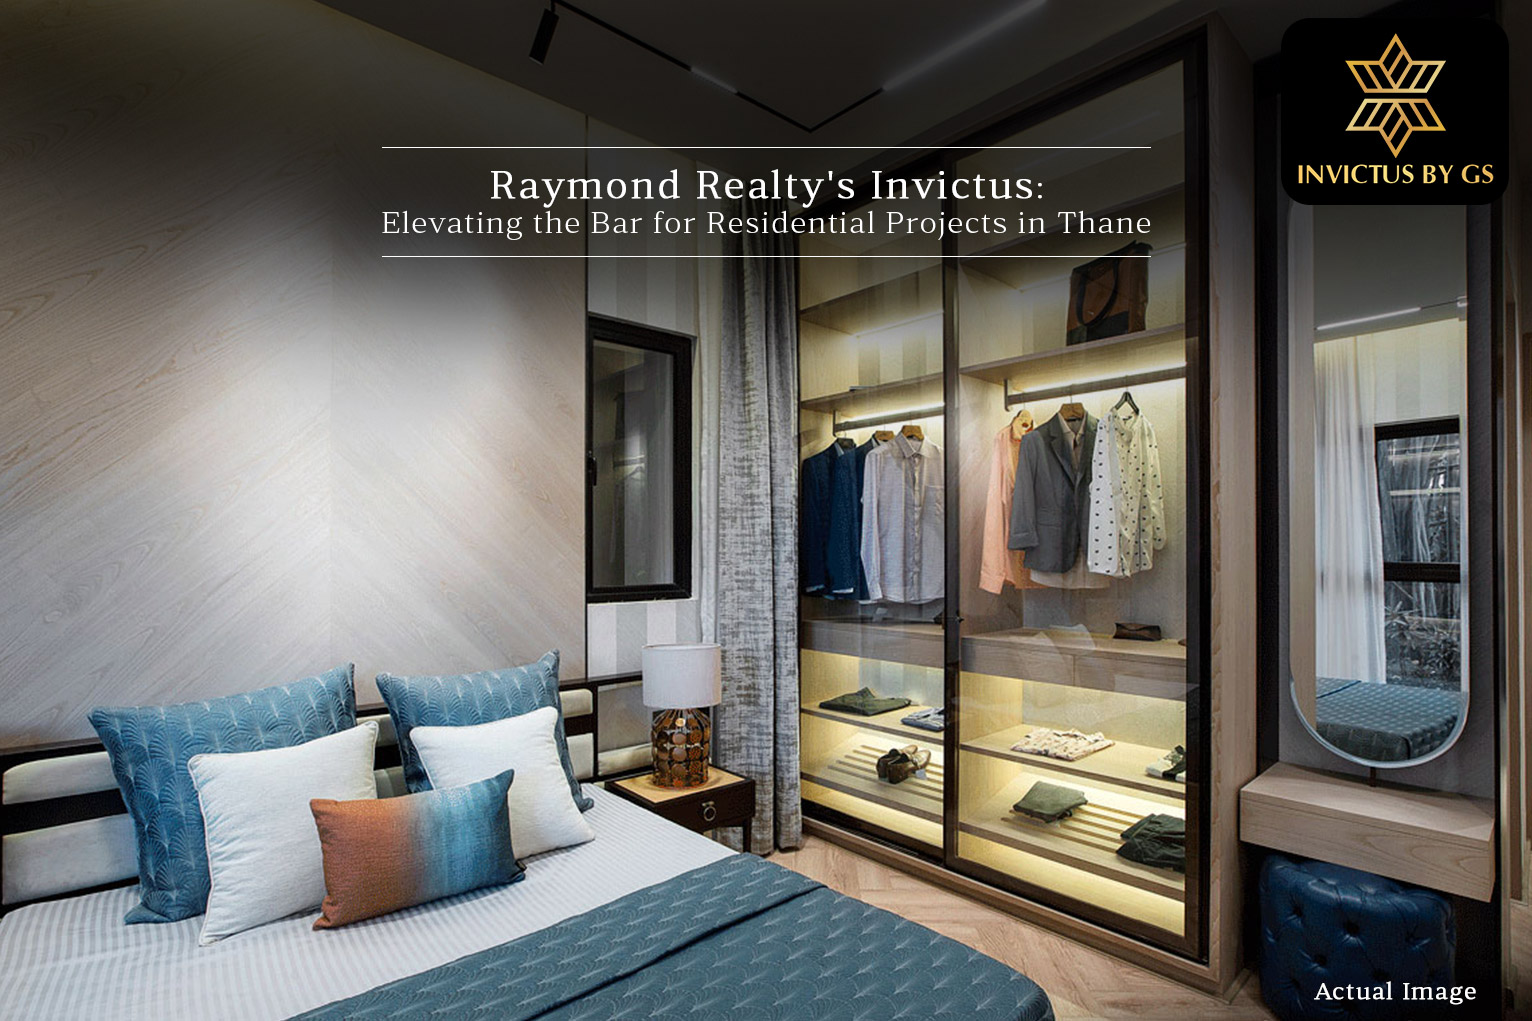 Raymond Realty’s Invictus By GS: Elevating The Bar for Residential Projects in Thane